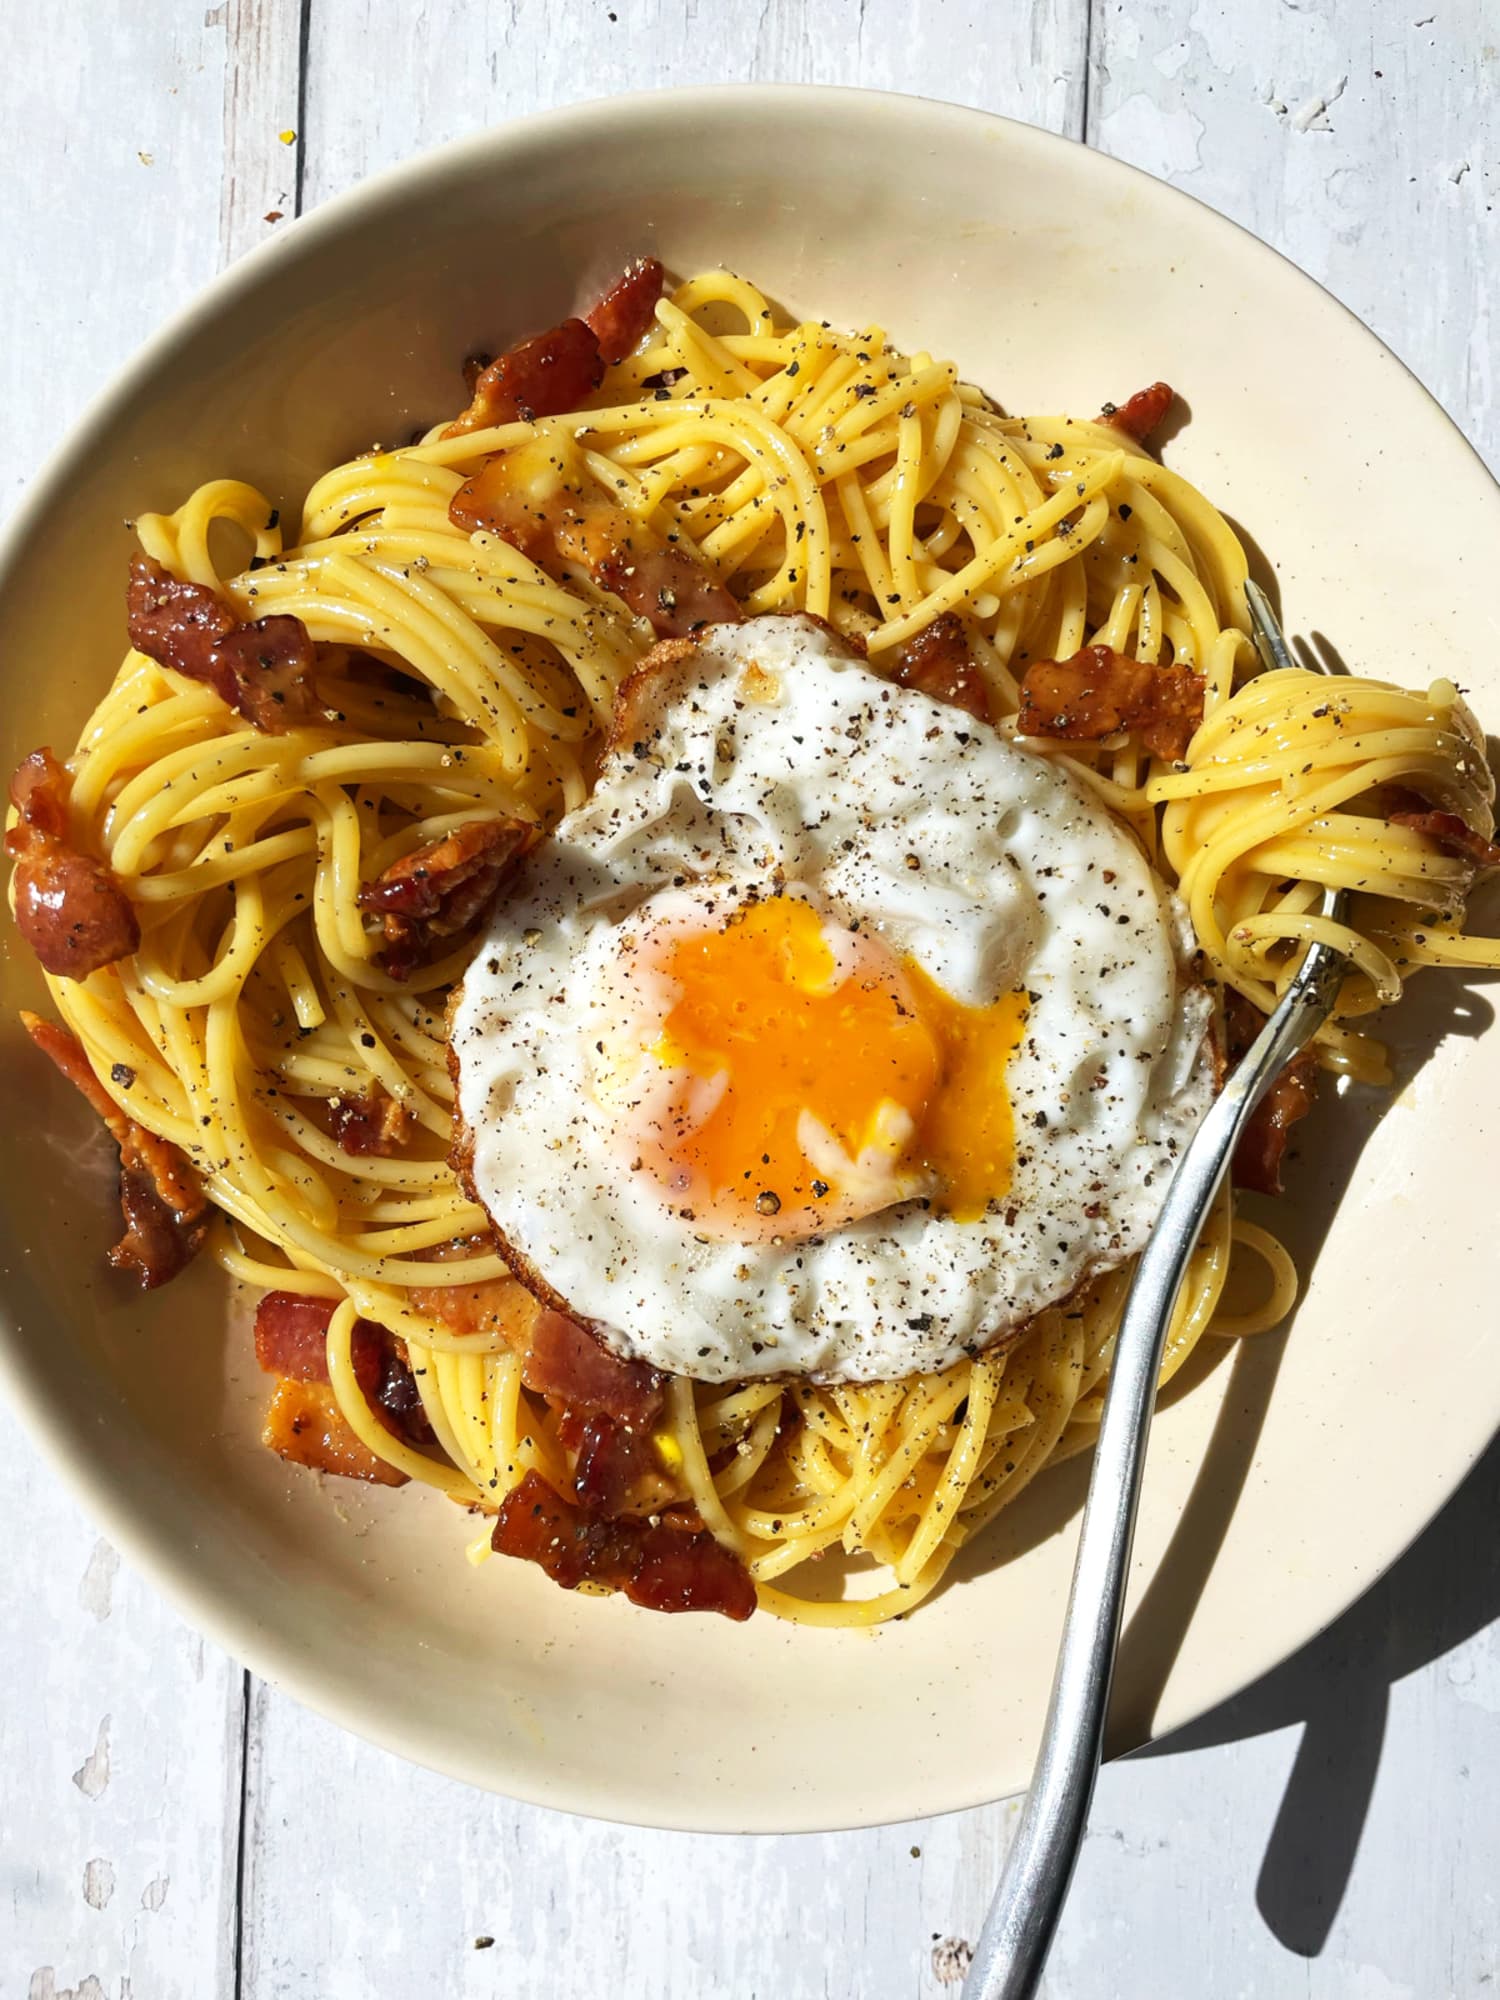 Spaghetti for Breakfast? With Bacon and Egg Pasta, the Answer is Yes!